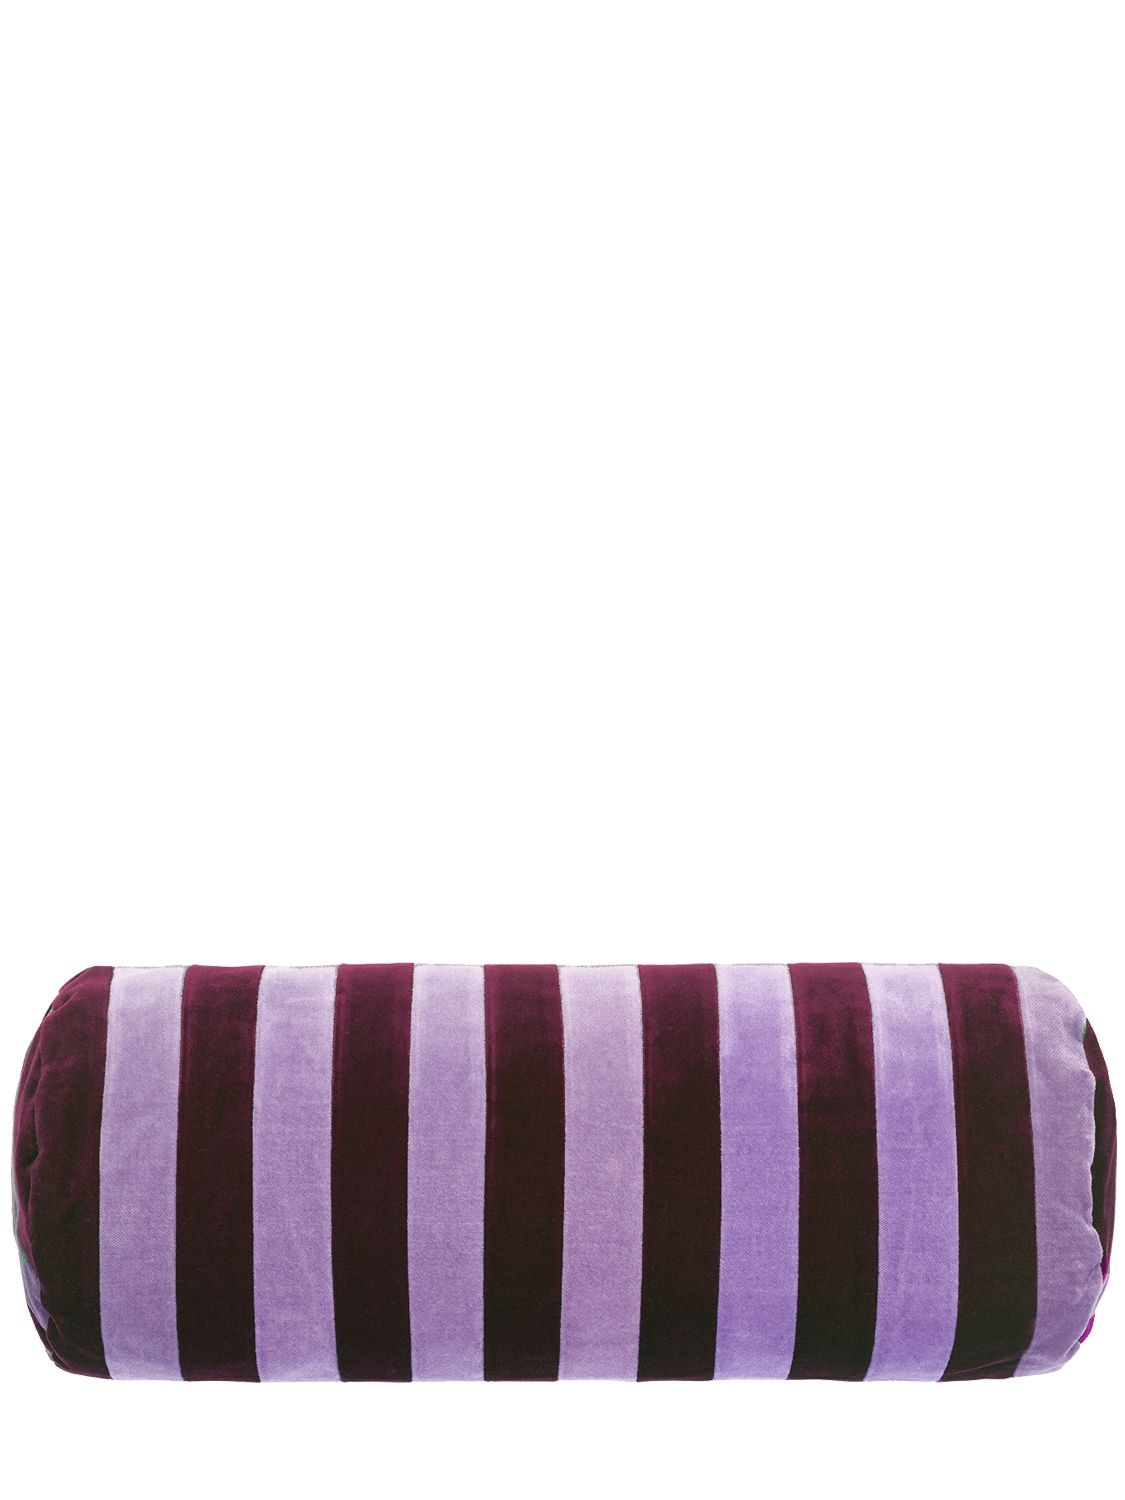 Christina Lundsteen Striped Bolster In Purple